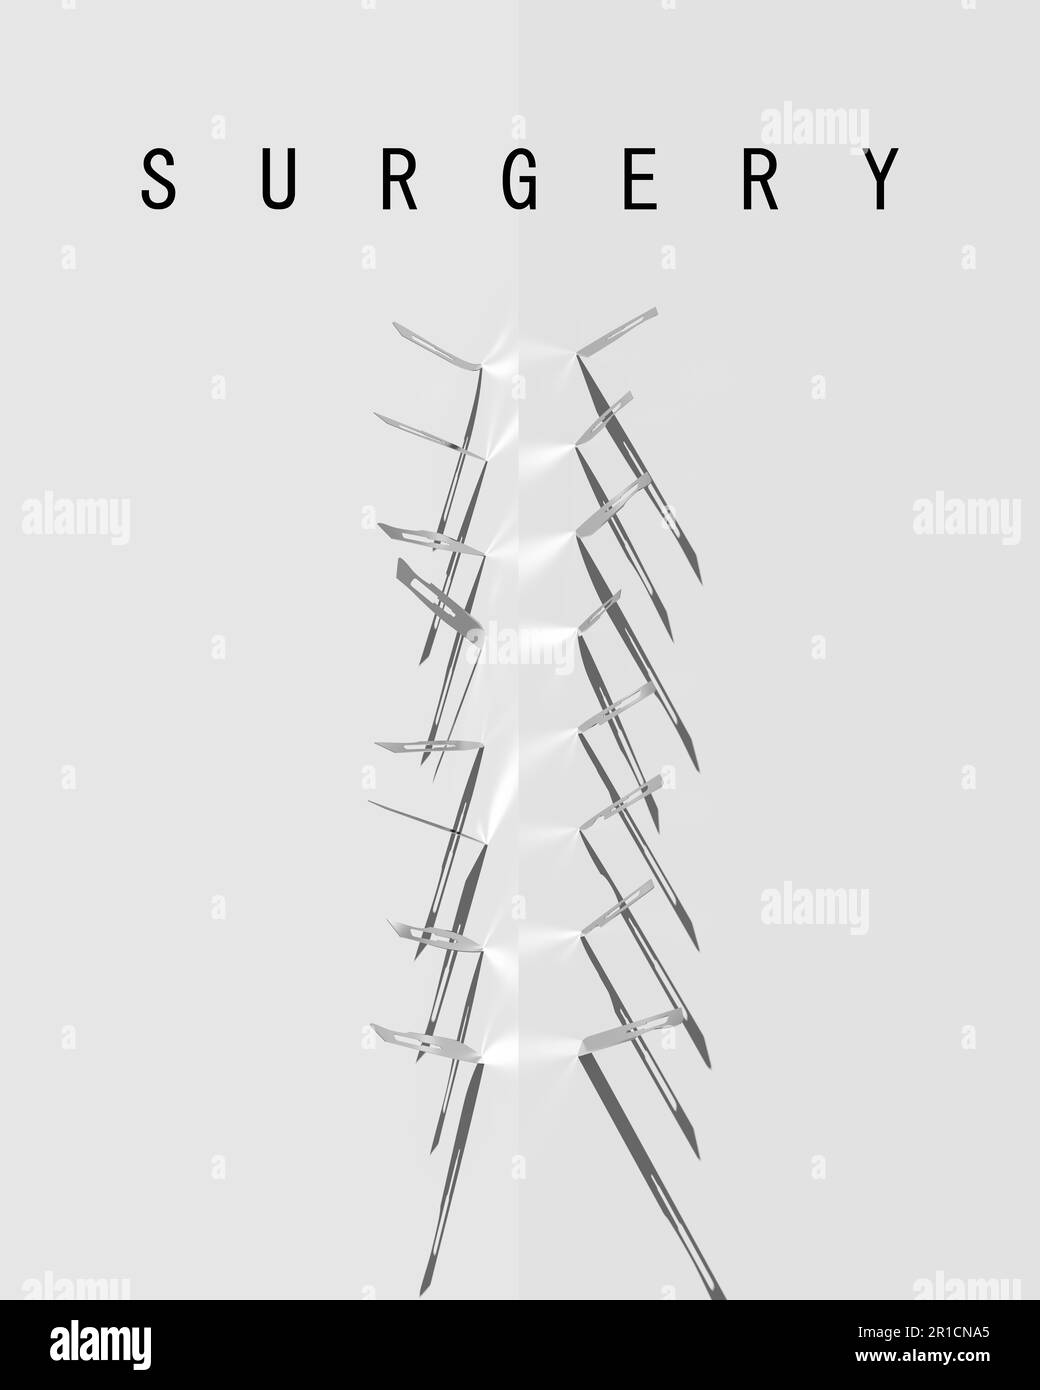 Scalpel Blade Surgical Instrument Surgery Precision Stainless Steal Equipment Specialized Medical Cutting Health Care White Background 3d illustration Stock Photo